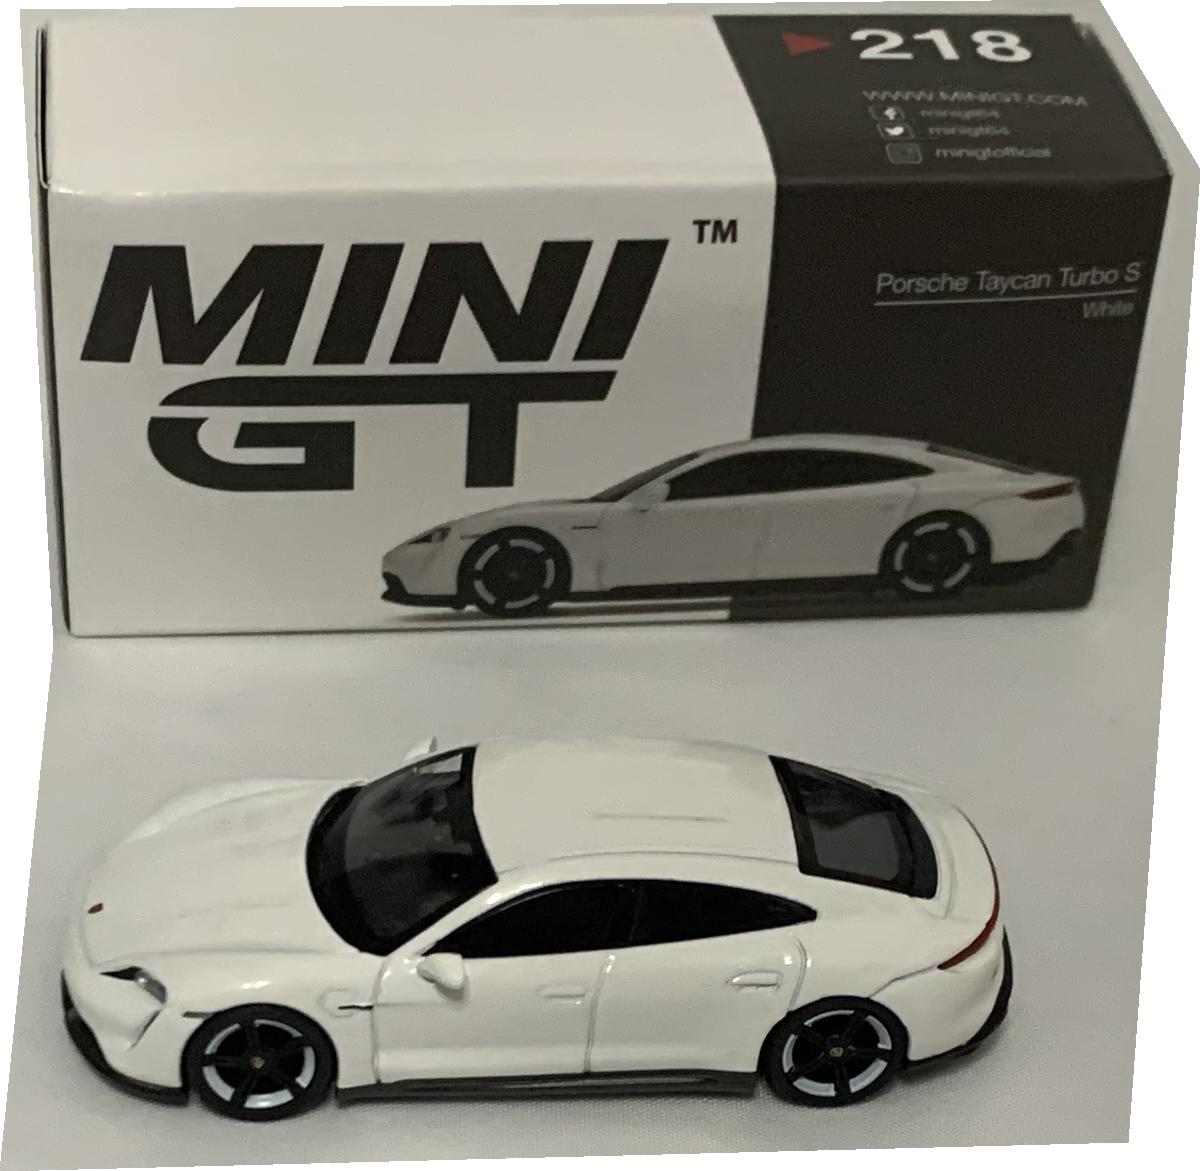 n excellent scale model of a Porsche Taycan Turbo S decorated in white and black wheels with white rims.